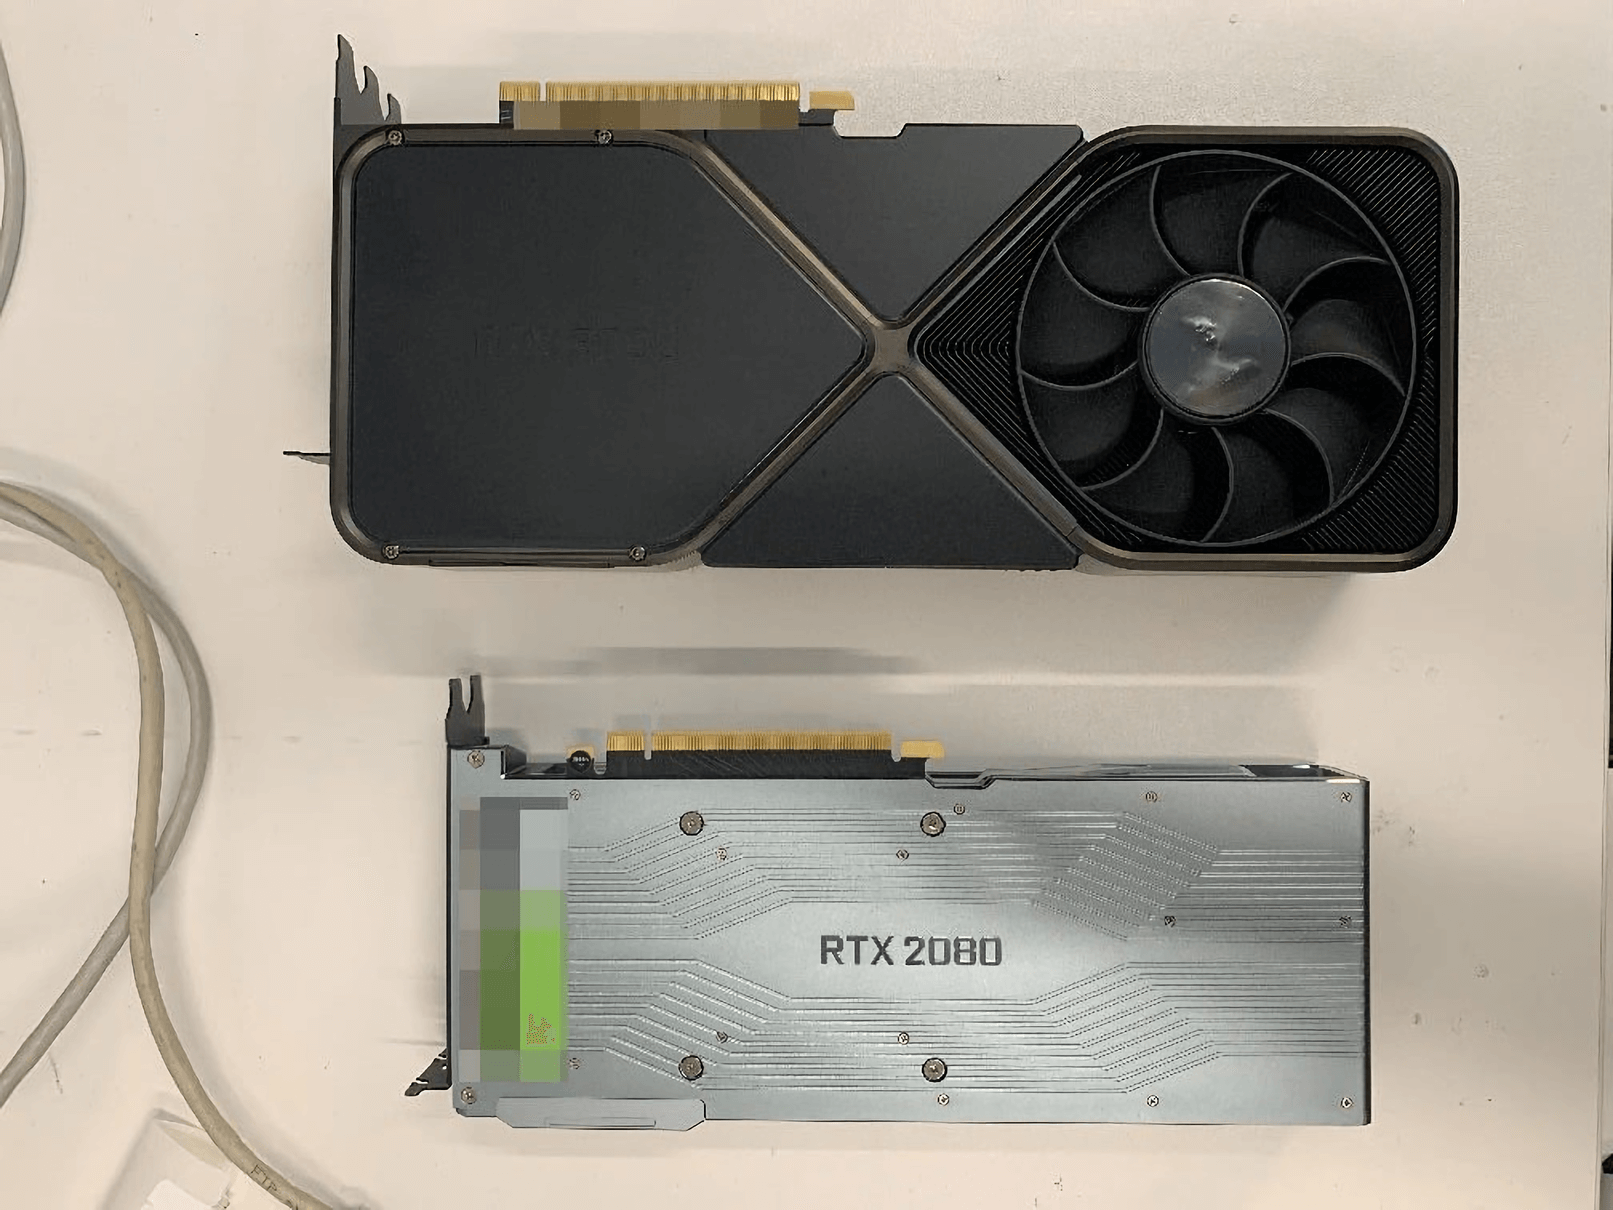 Leaked Nvidia GeForce RTX 3090 images reveal a massive card 1